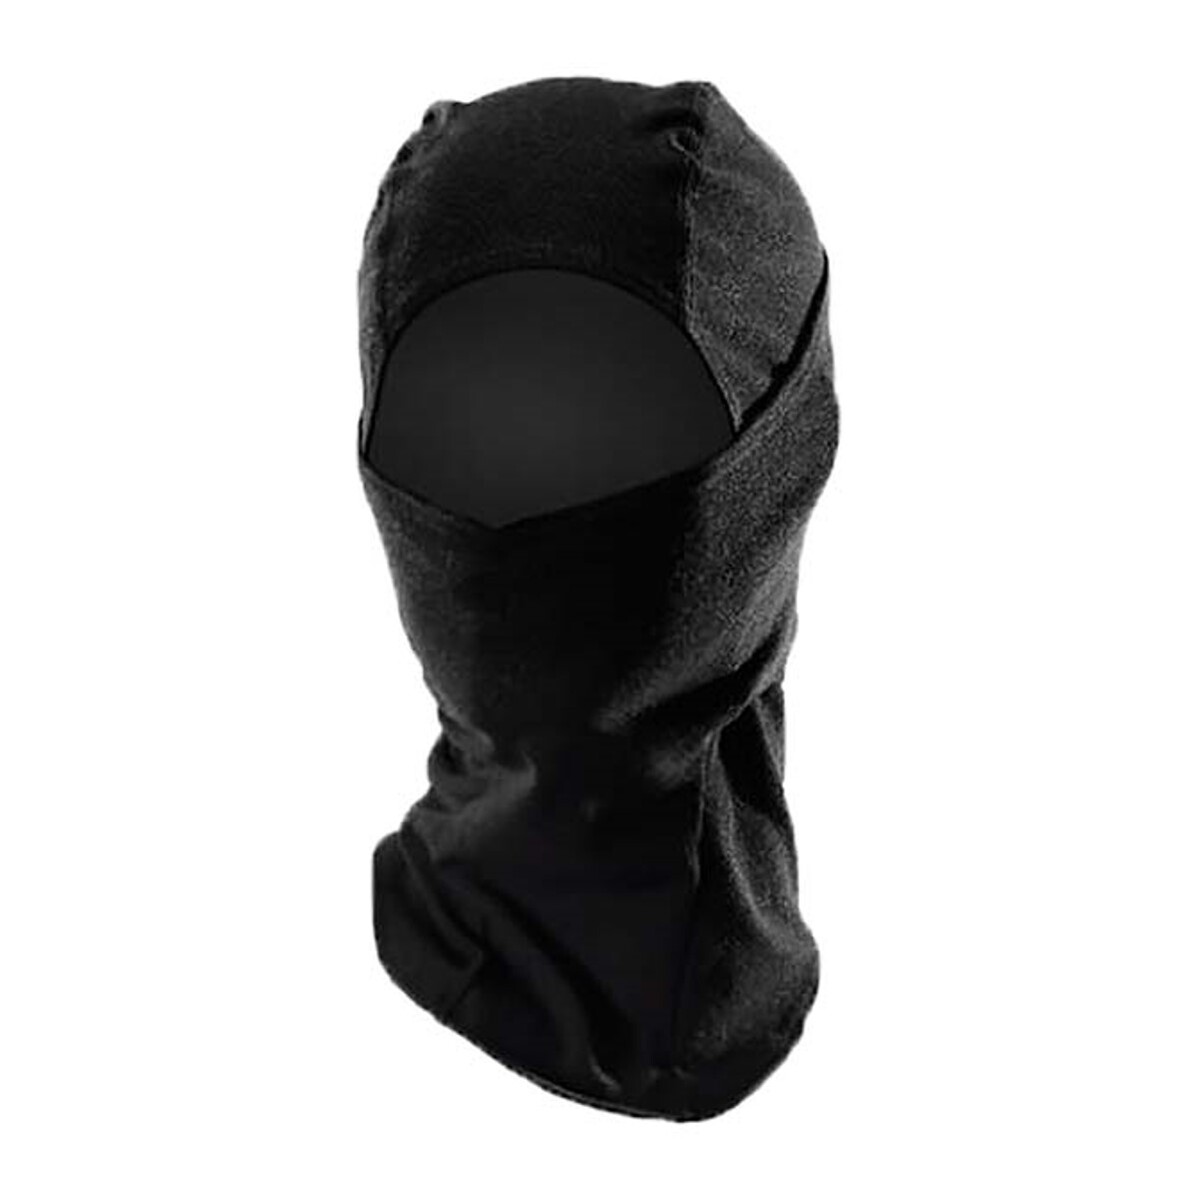 National Safety Apparel Black DRIFIRE® PRIME Cold Weather Flame Resistant Balaclava